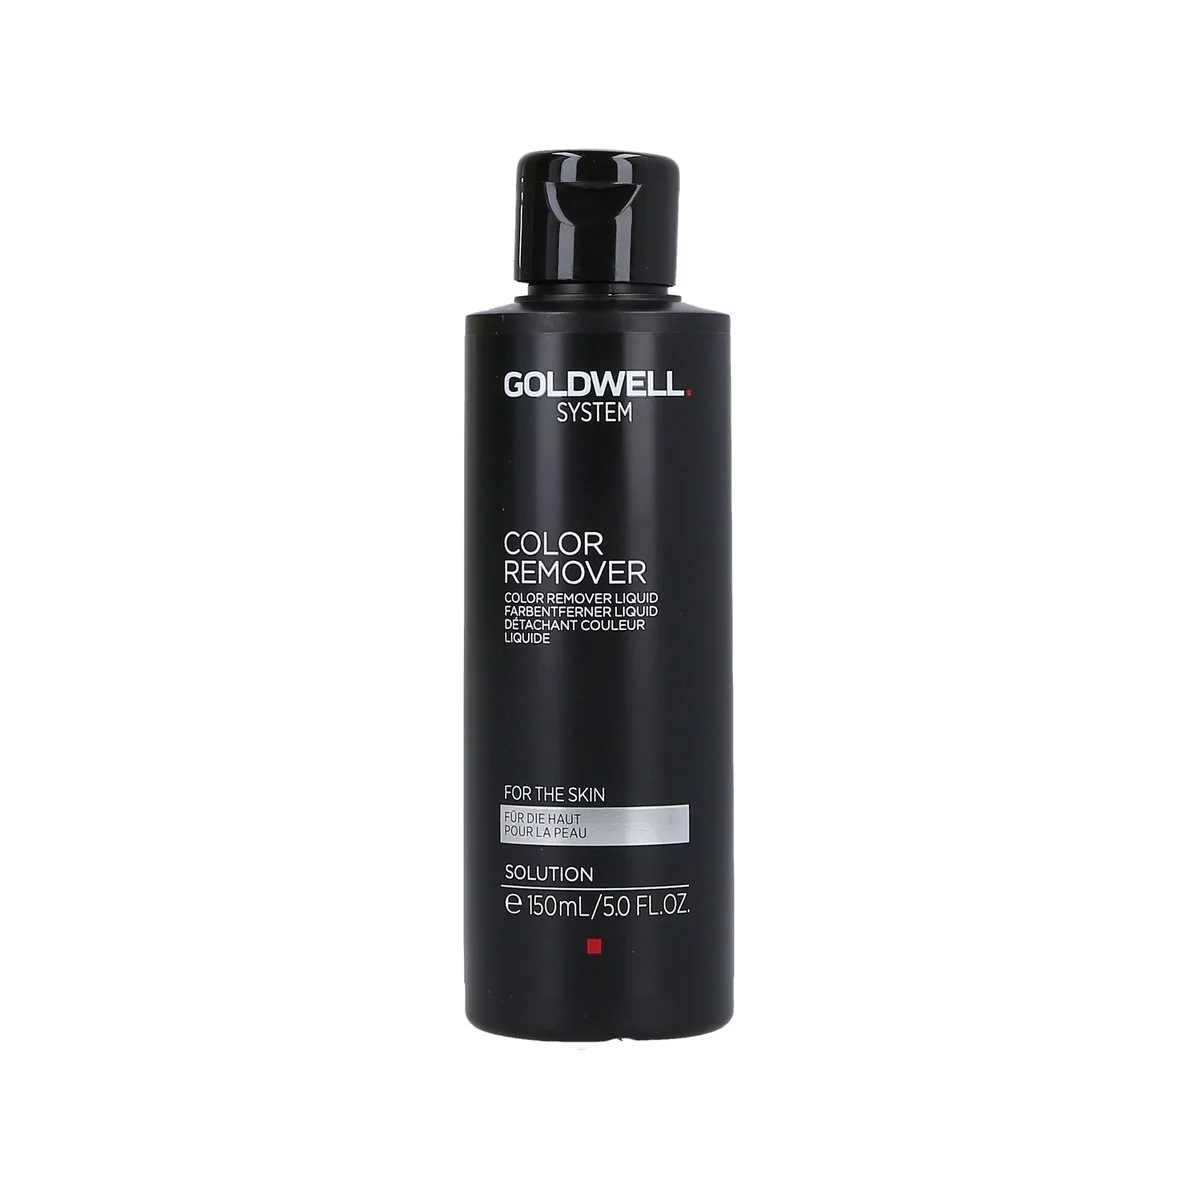 Goldwell System Color Remover Skin 150 ml usuwa resztki farby ze skóry